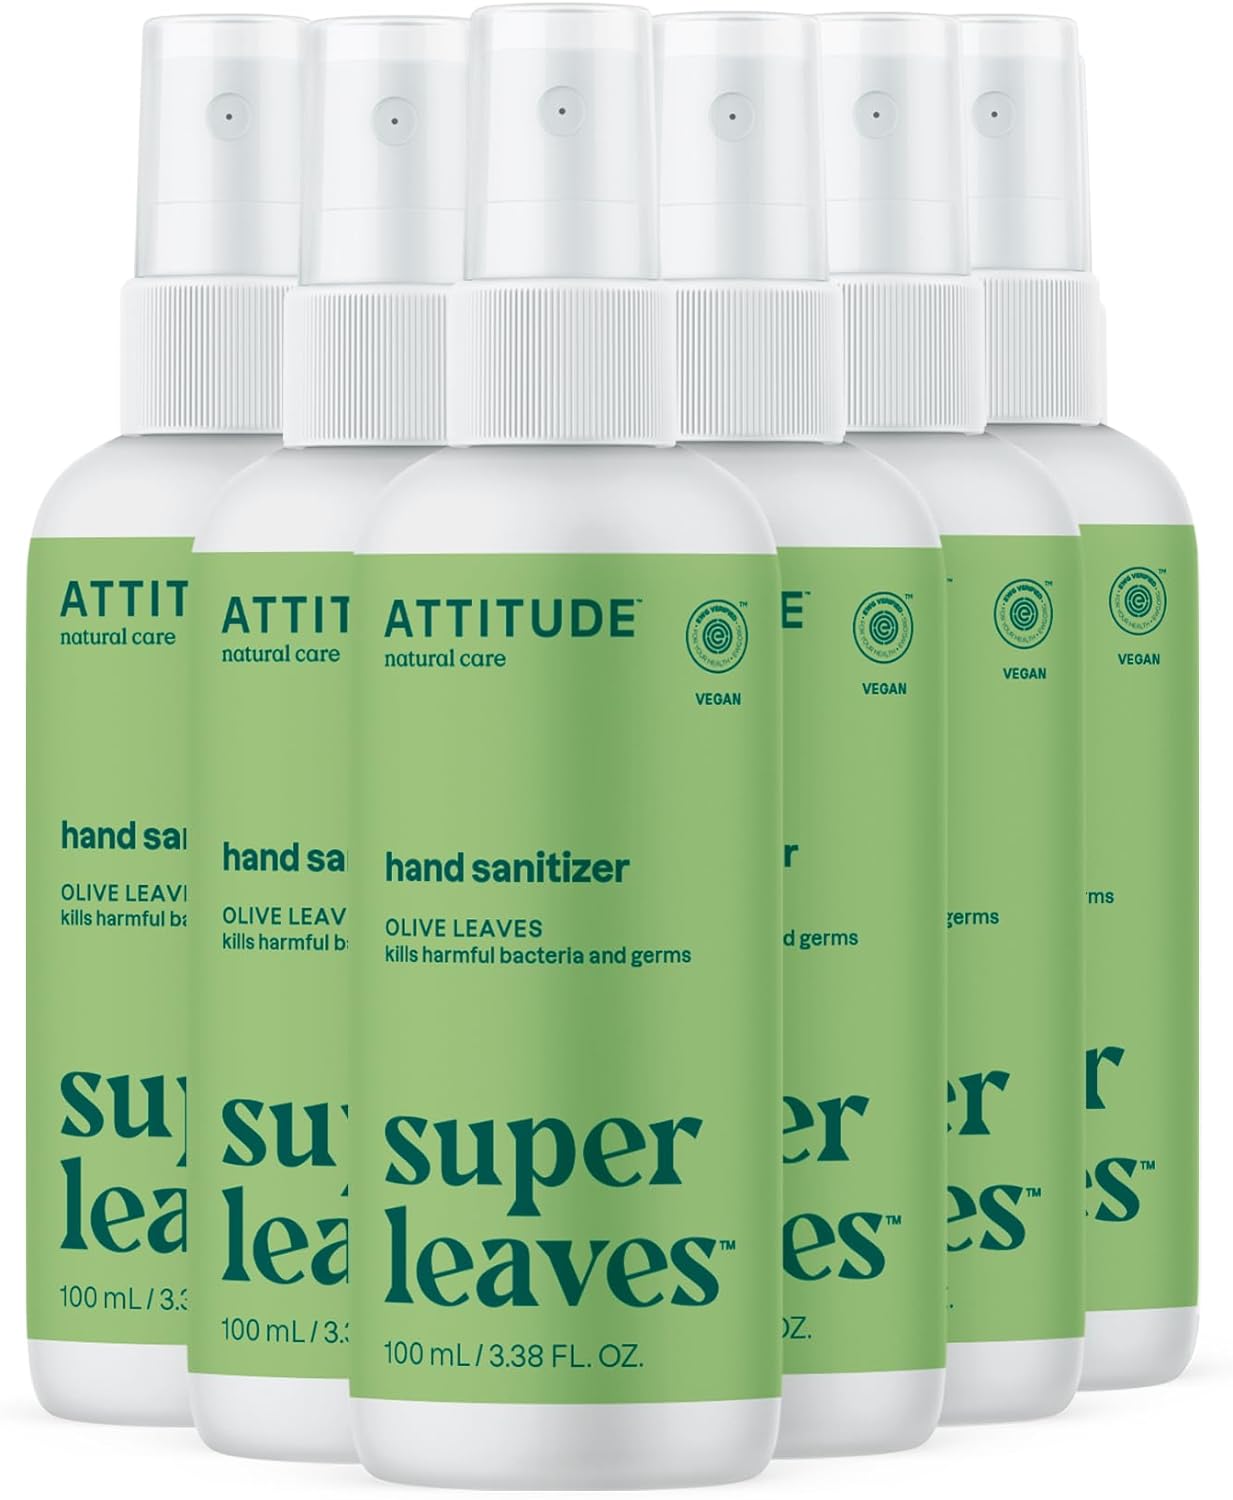 ATTITUDE Hand Sanitizer Spray for Adults and Kids, EWG Verified, Kills Bacteria and Germs, Vegan, Olive Leaves, 3.38 Fl Oz (Spray Bottle) (Pack of 6)